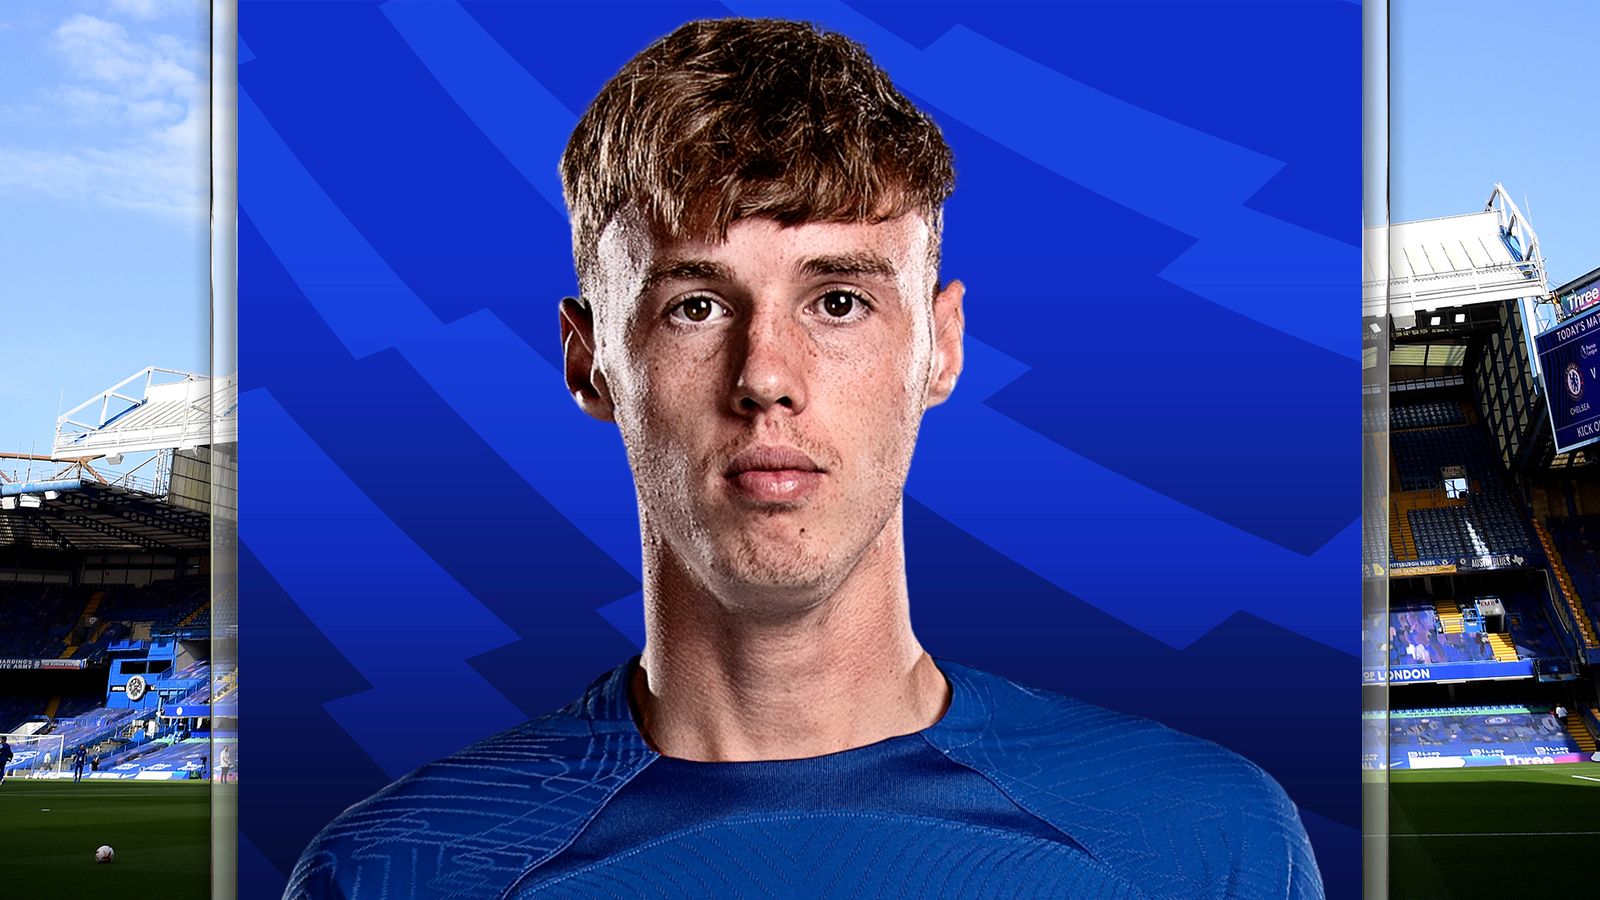 Cole Palmer exclusive interview: Chelsea midfielder reveals he never wanted to leave boyhood club Man City | Football News